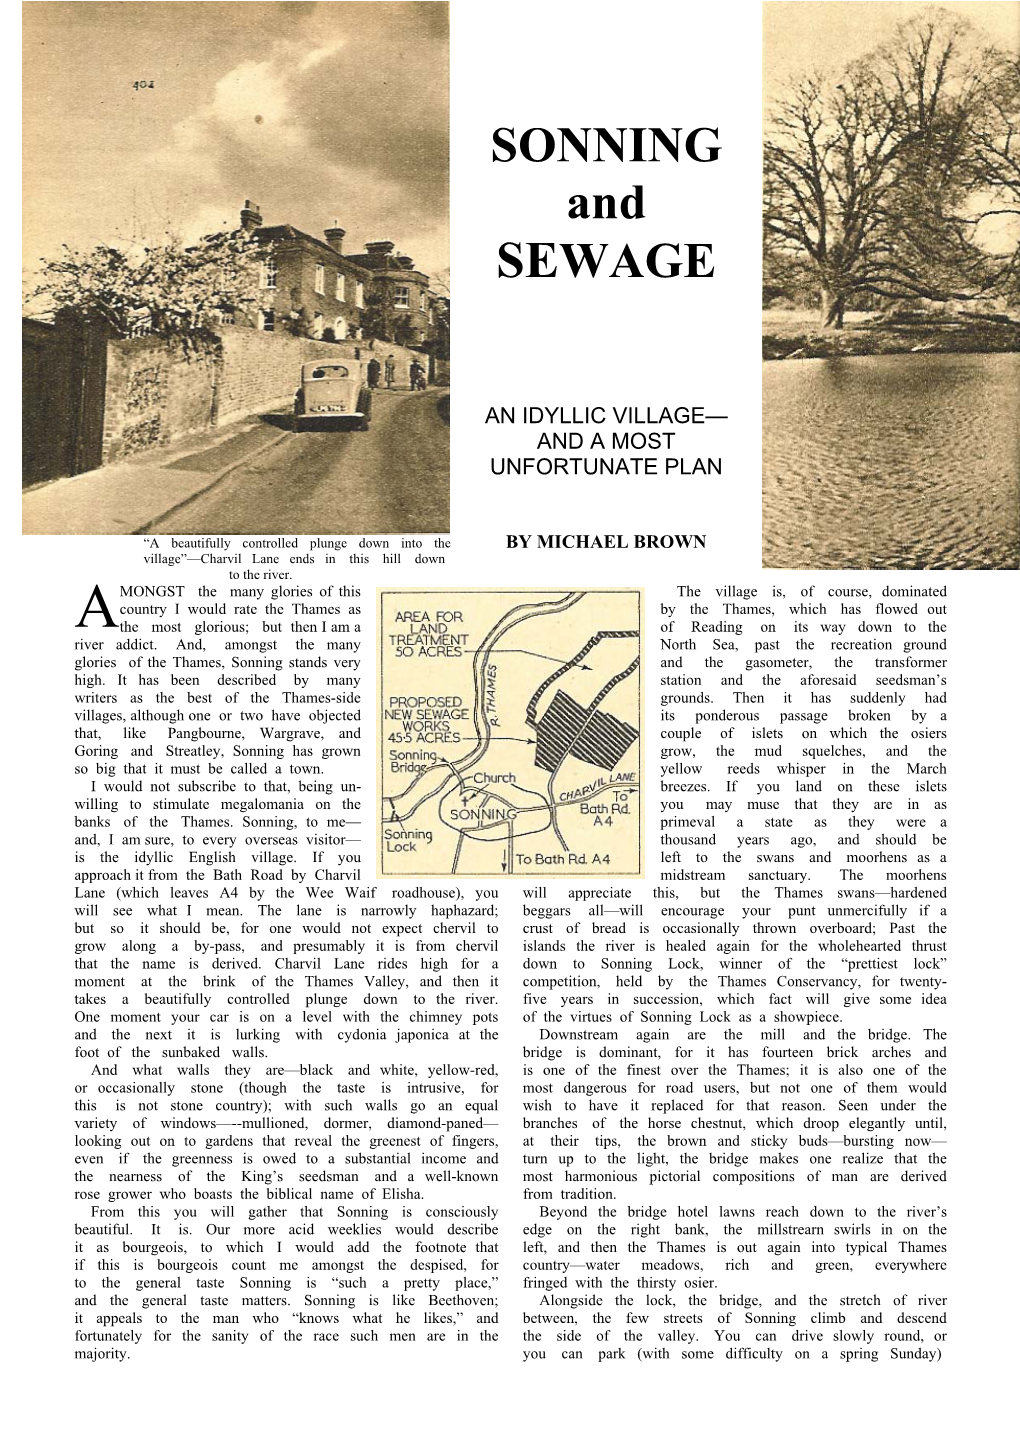 SONNING and SEWAGE